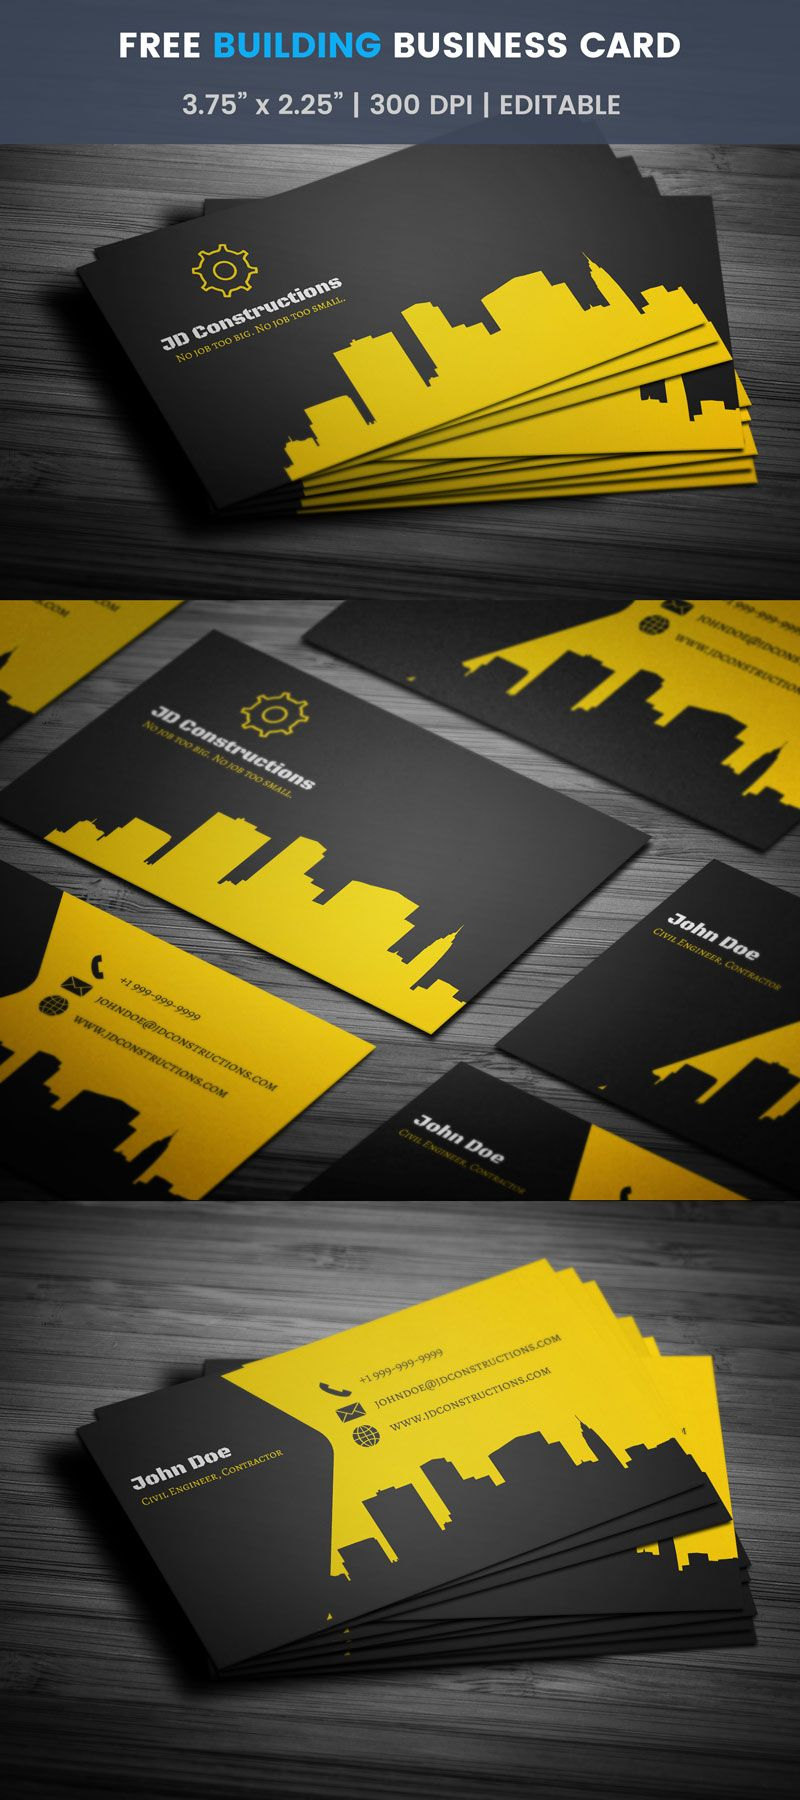 Free Construction Business Card Template Word Visiting Within Construction Business Card Templates Download Free